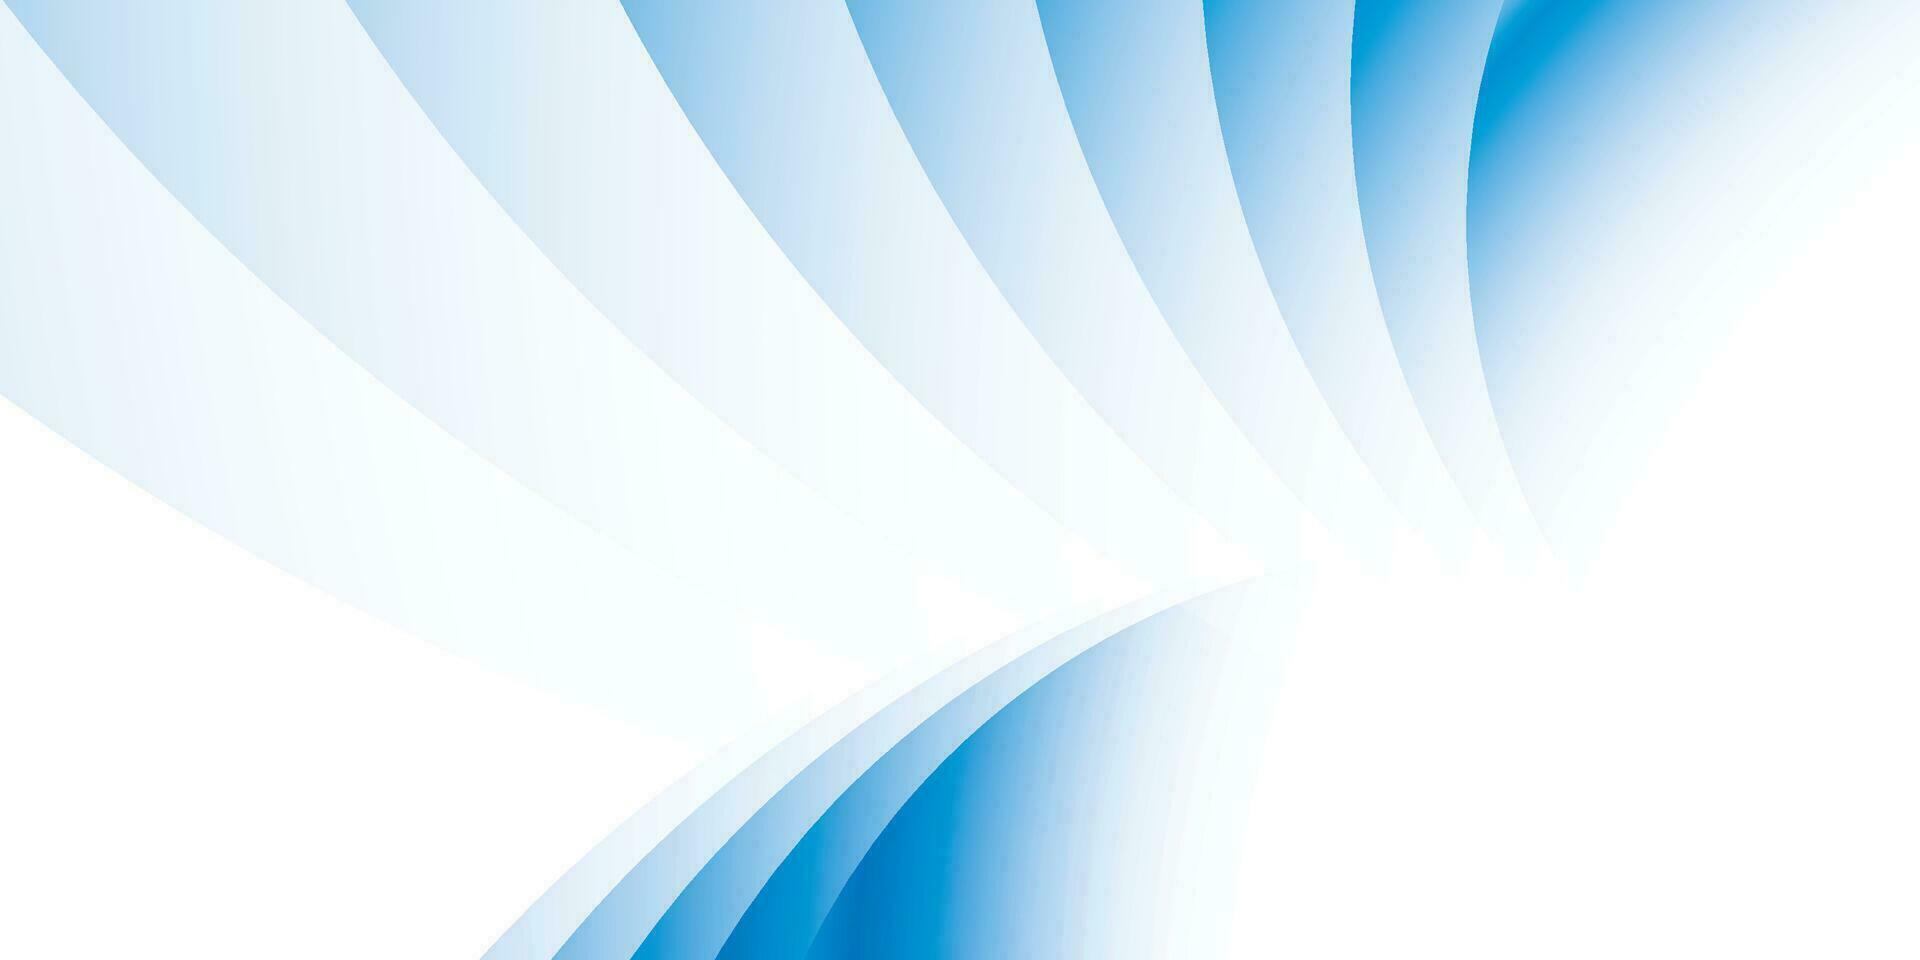 Abstract geometric white and blue color background with round shape. Vector illustration.